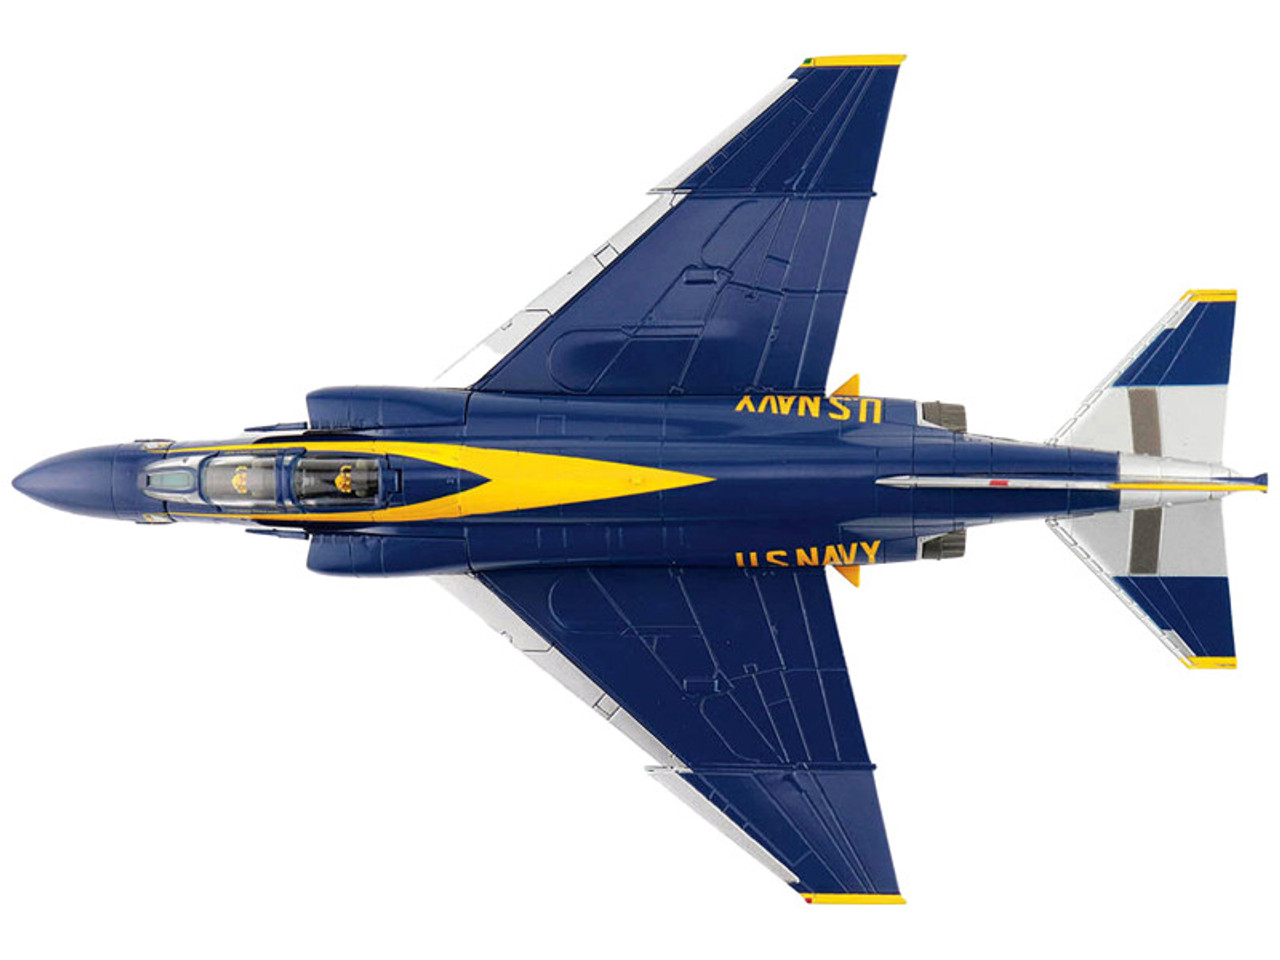 McDonnell Douglas F-4J Phantom II Fighter Aircraft "Blue Angels #2" United States Navy (1969) "Air Power Series" 1/72 Diecast Model by Hobby Master